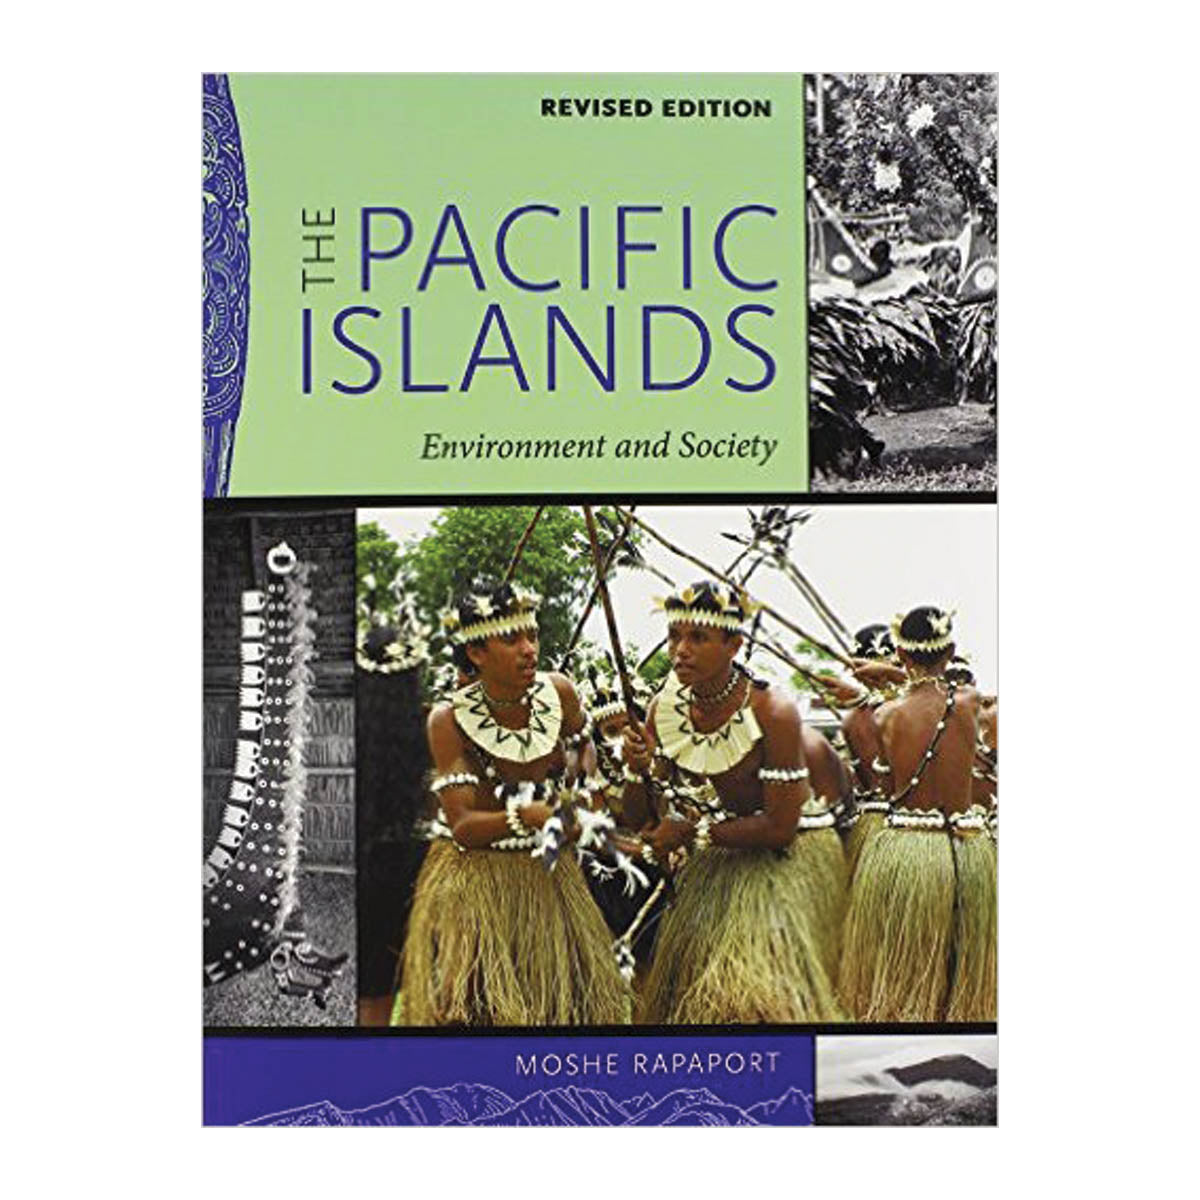 The Pacific Islands: Environment and Society (Revised Edition)